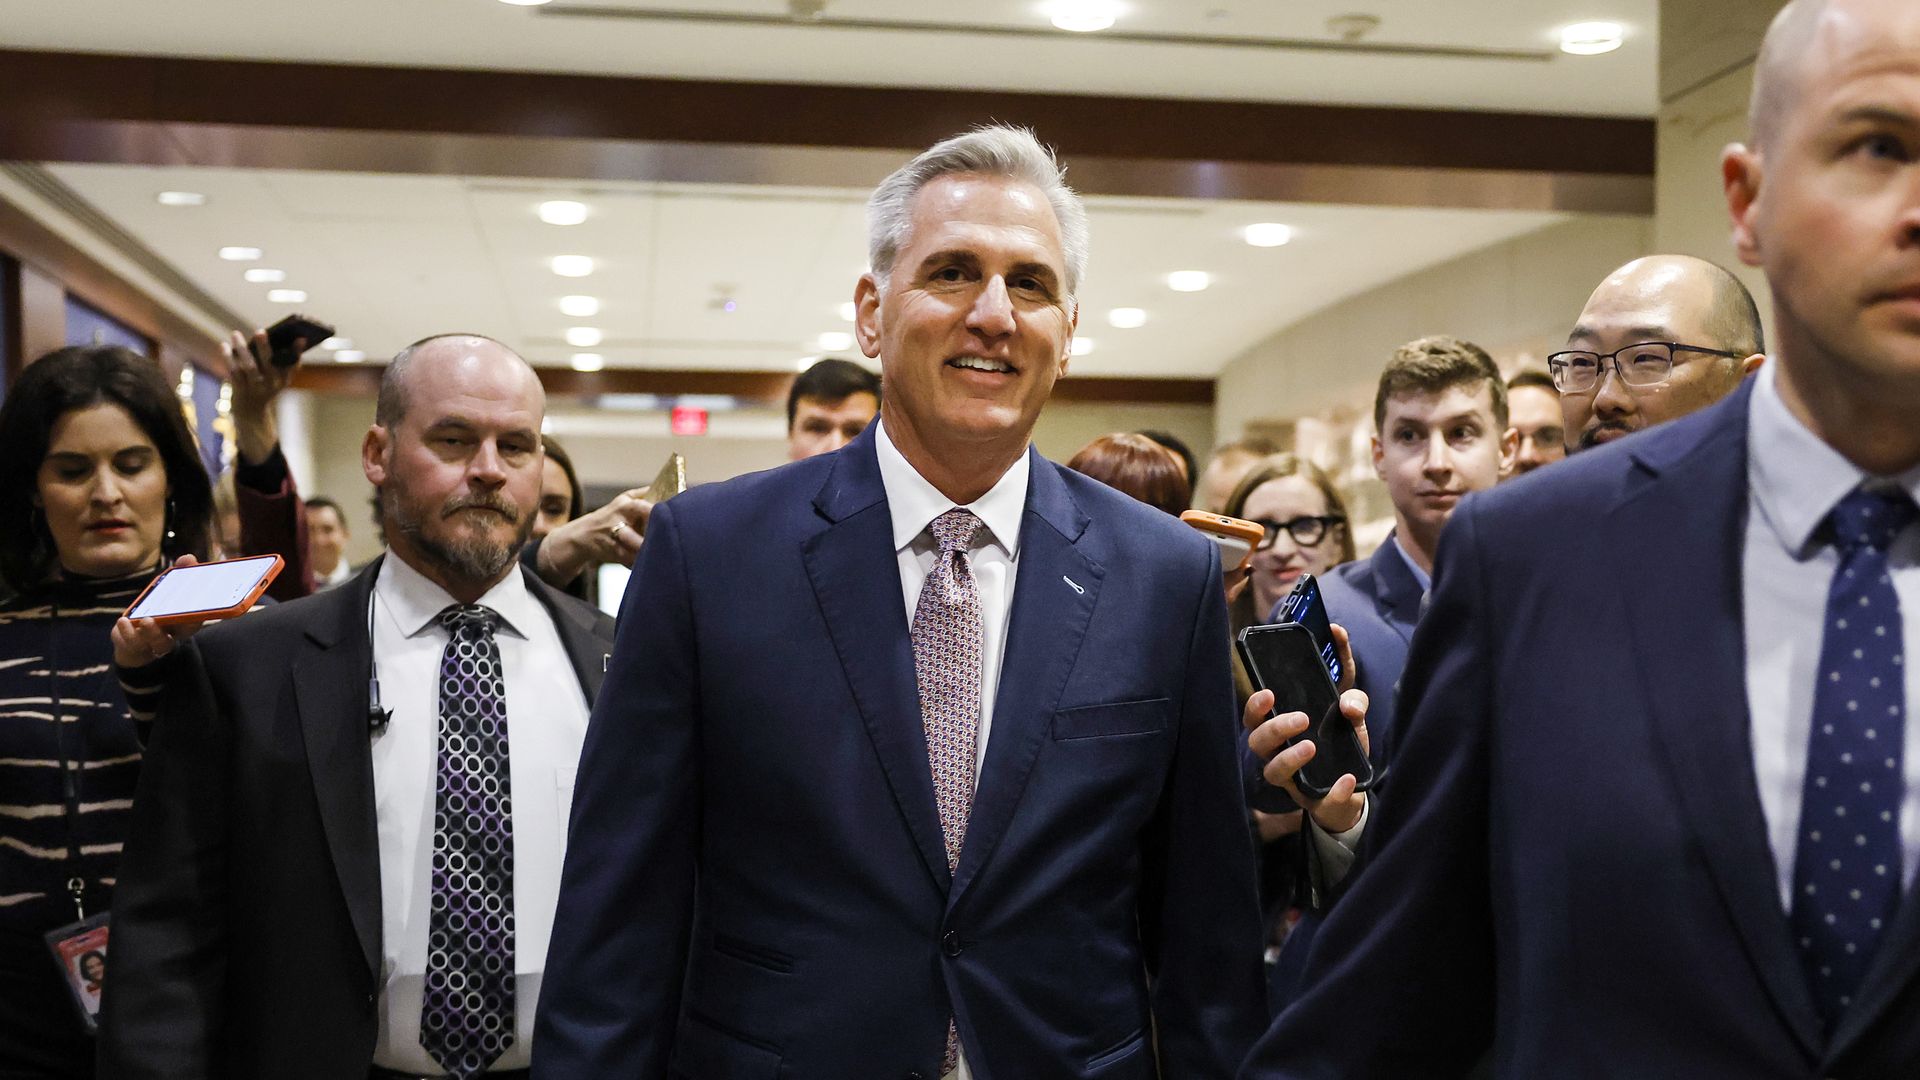 House Minority Leader Kevin McCarthy, wearing a blue suit jacket, white shirt and a red and white tie, walks in the Capitol visitors center trailed by reporters, security and staff.